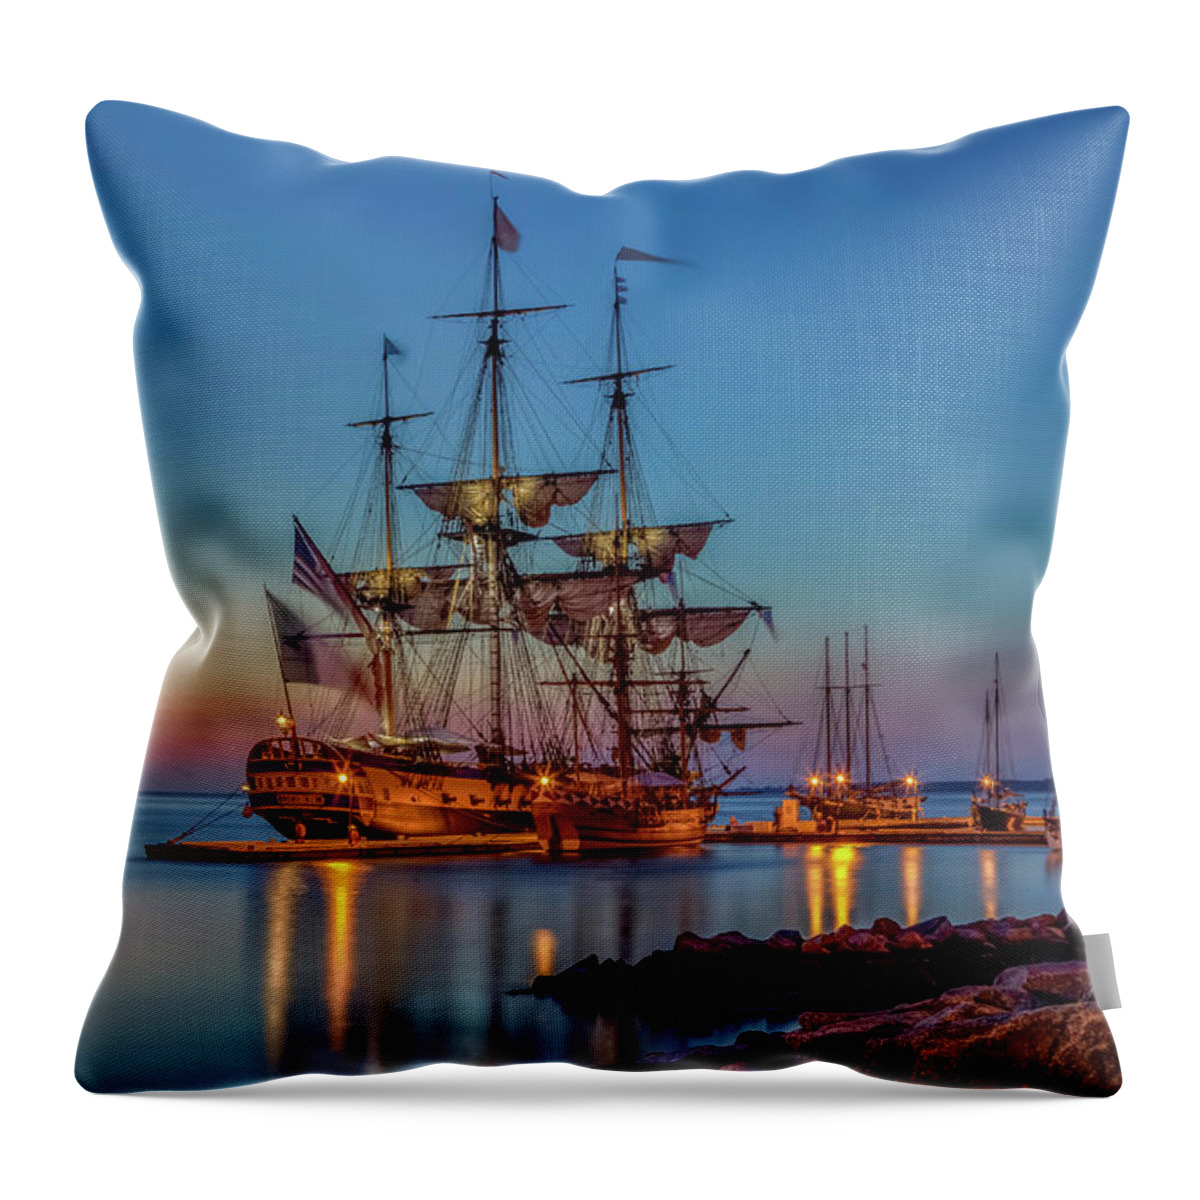 L'hermione Throw Pillow featuring the photograph Lafayette's Hermione Voyage 2015 by Jerry Gammon